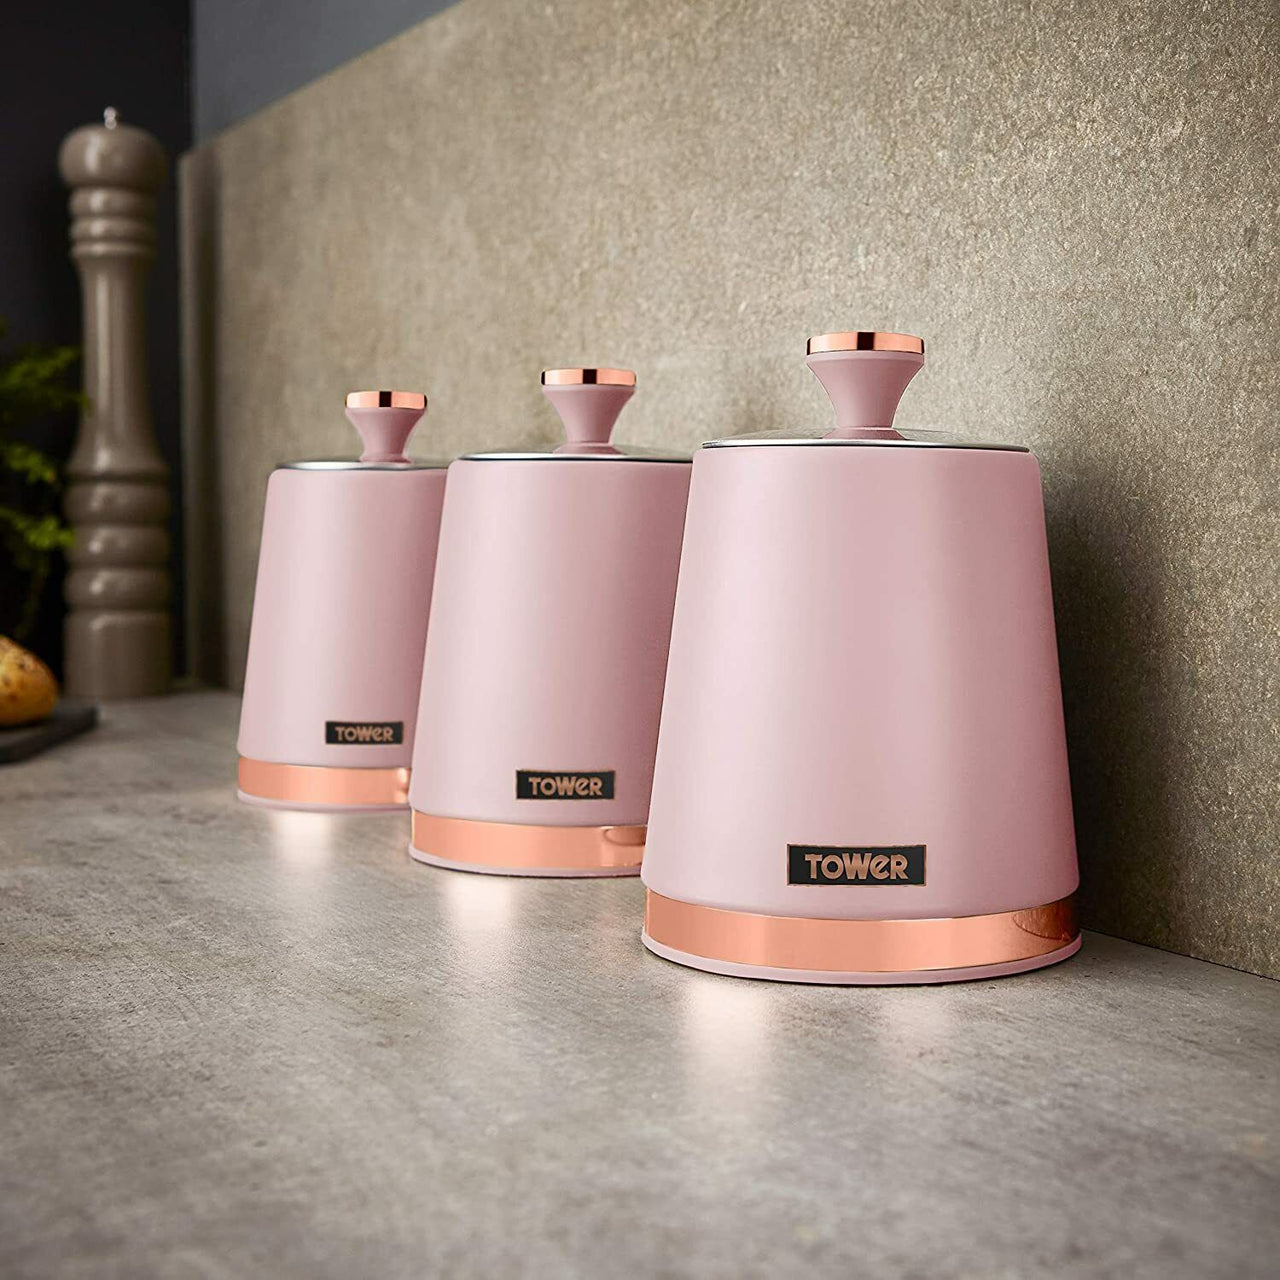 Tower Cavaletto Bread Bin & Storage Tea Coffee Sugar Canisters Set Pink/Rose Gold